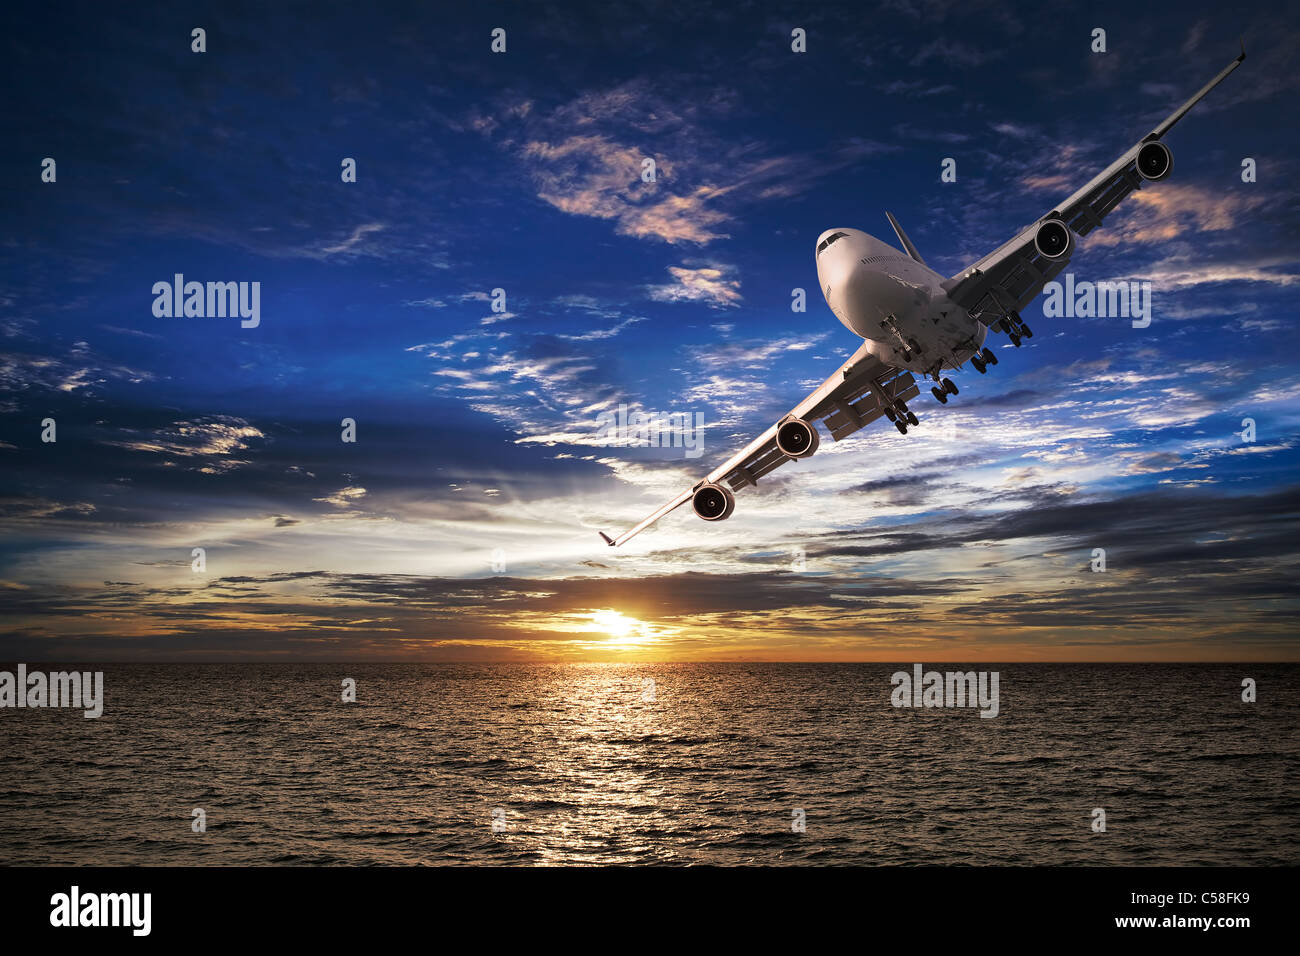 Jet plane over the sea at sunset time Stock Photo